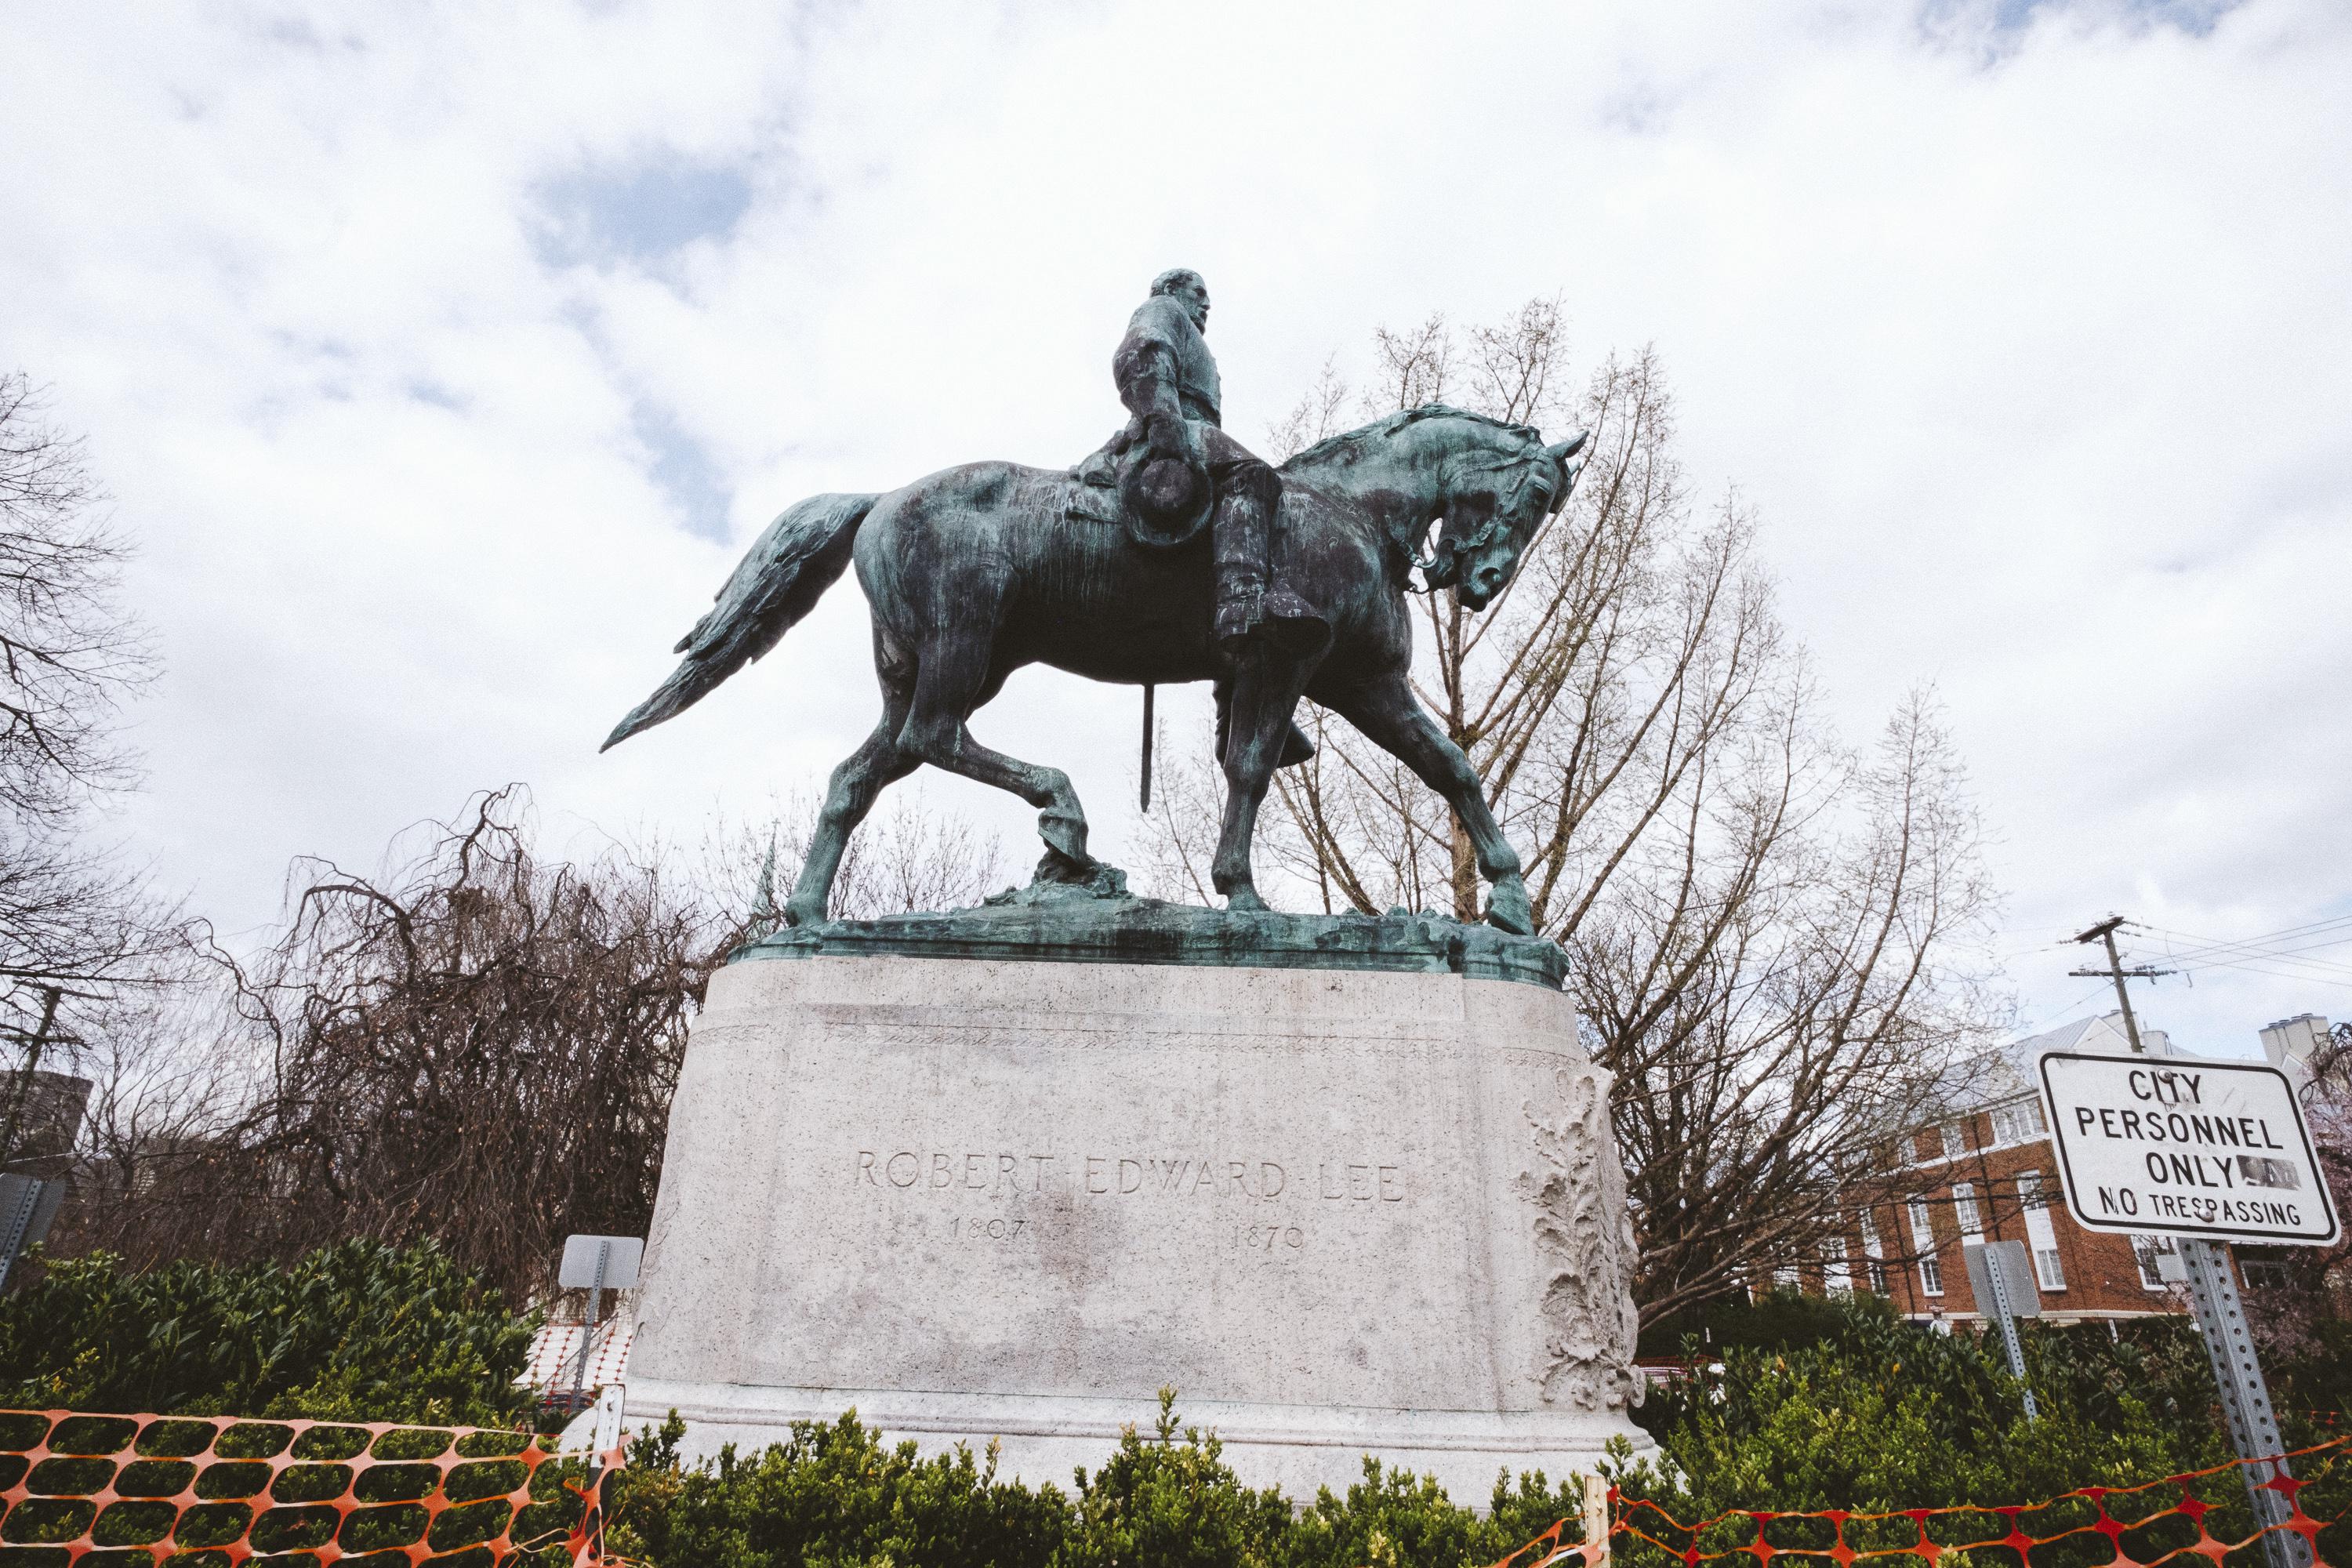 Statue of Lee on a horse with plastic fencing around it on a cloudy day